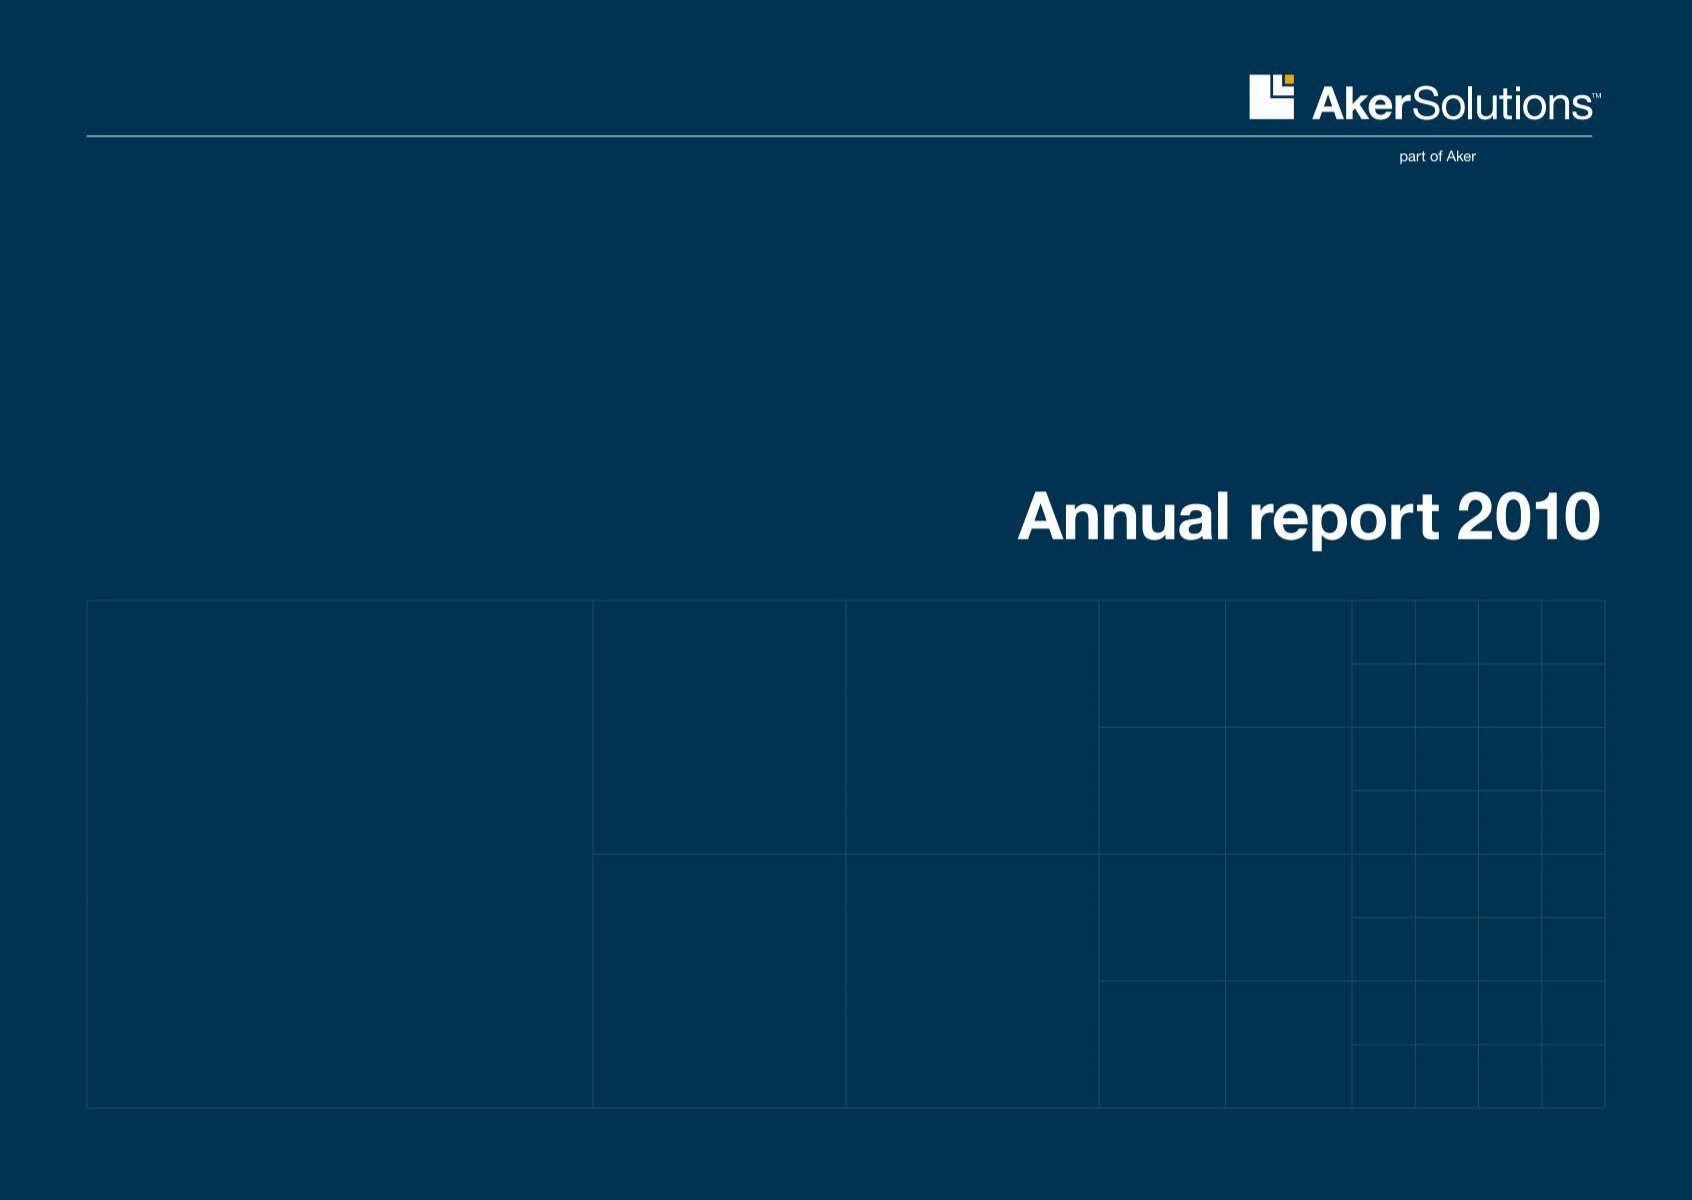 Annual report 2010 - Aker Solutions